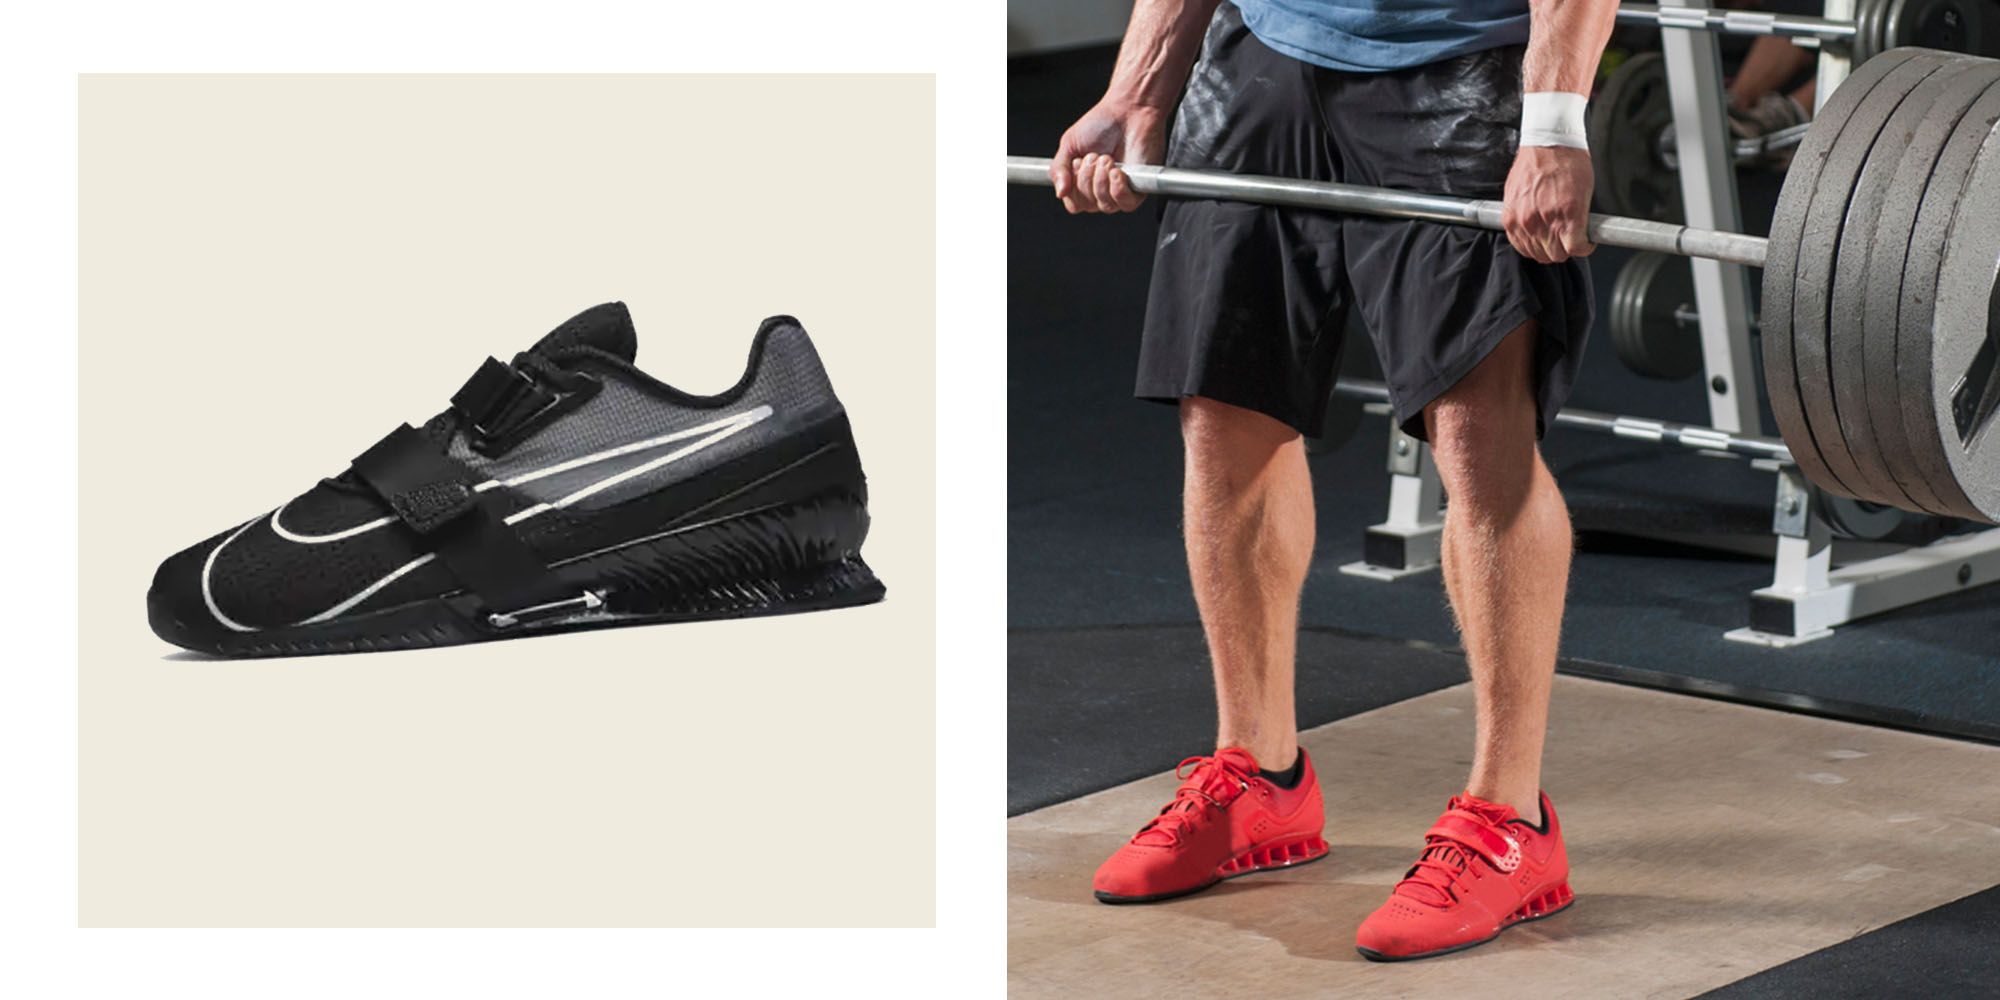 10 Best Weightlifting Shoes 2023, Recommended by Expert Lifters